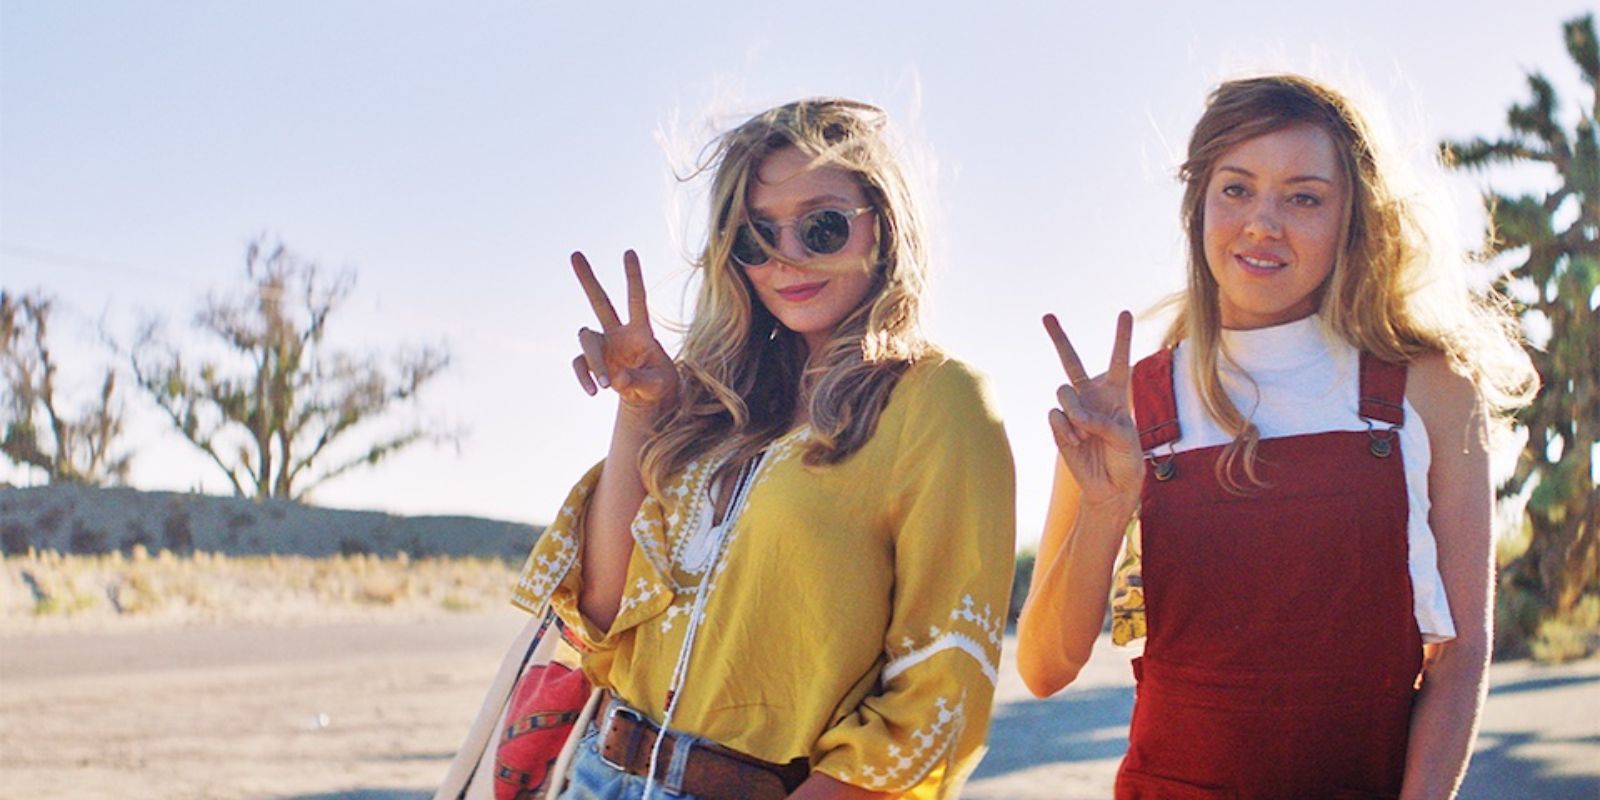 Ingrid Goes West - characters from the movie gesture peace signs with their fingers